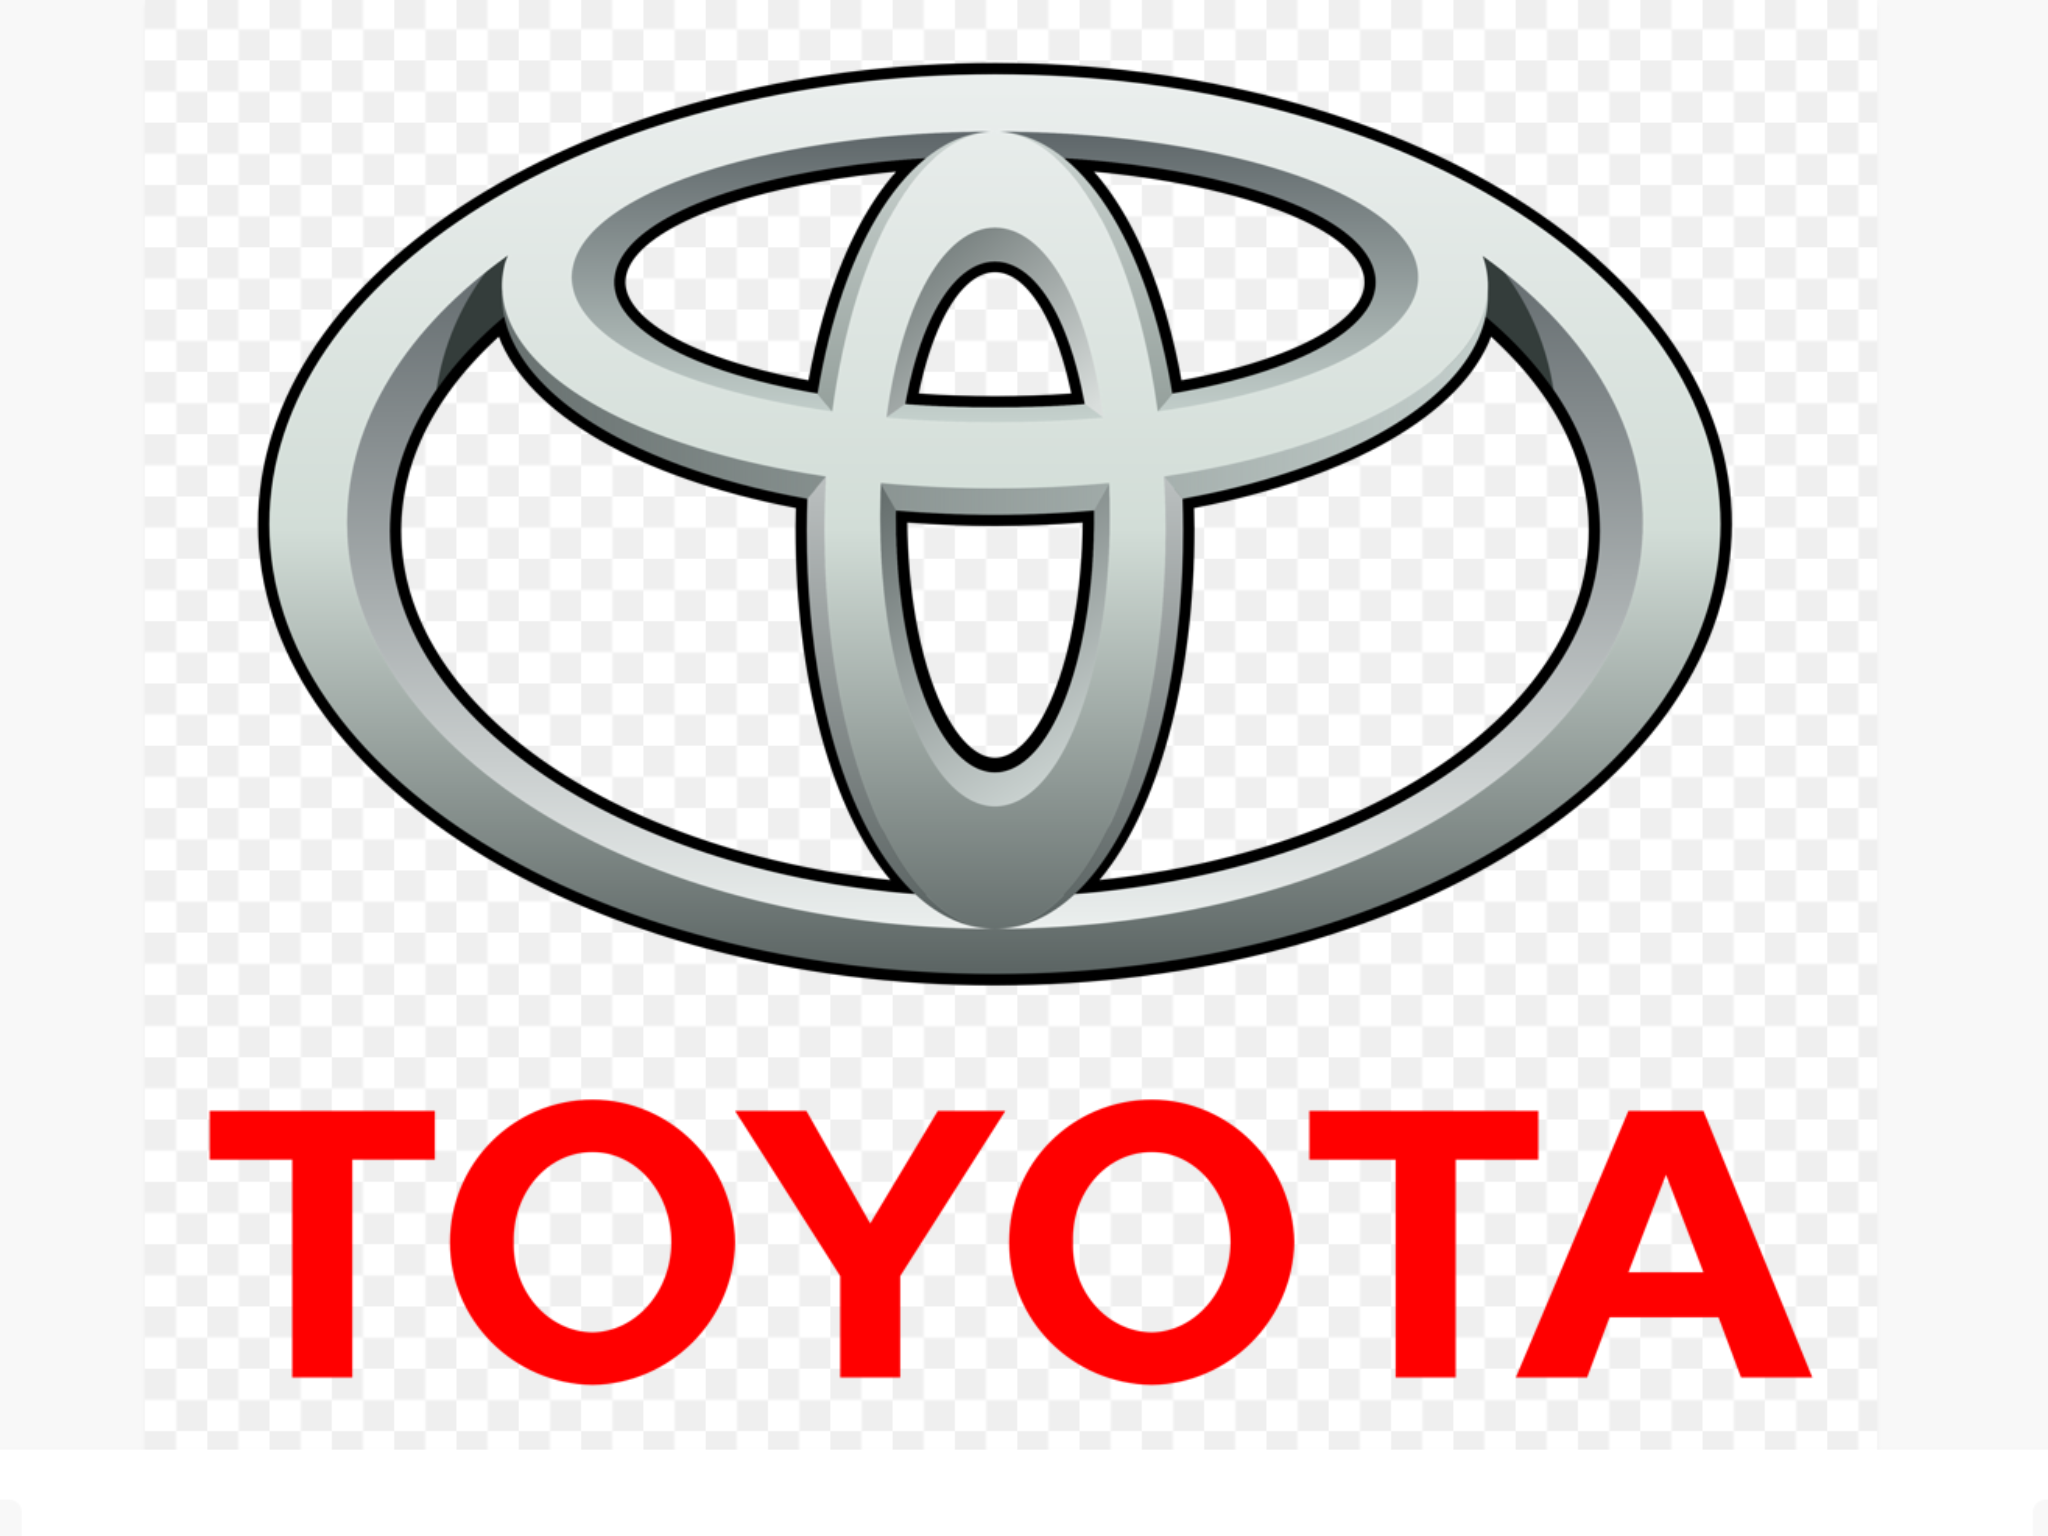 Manipulation and Deception at Toyota